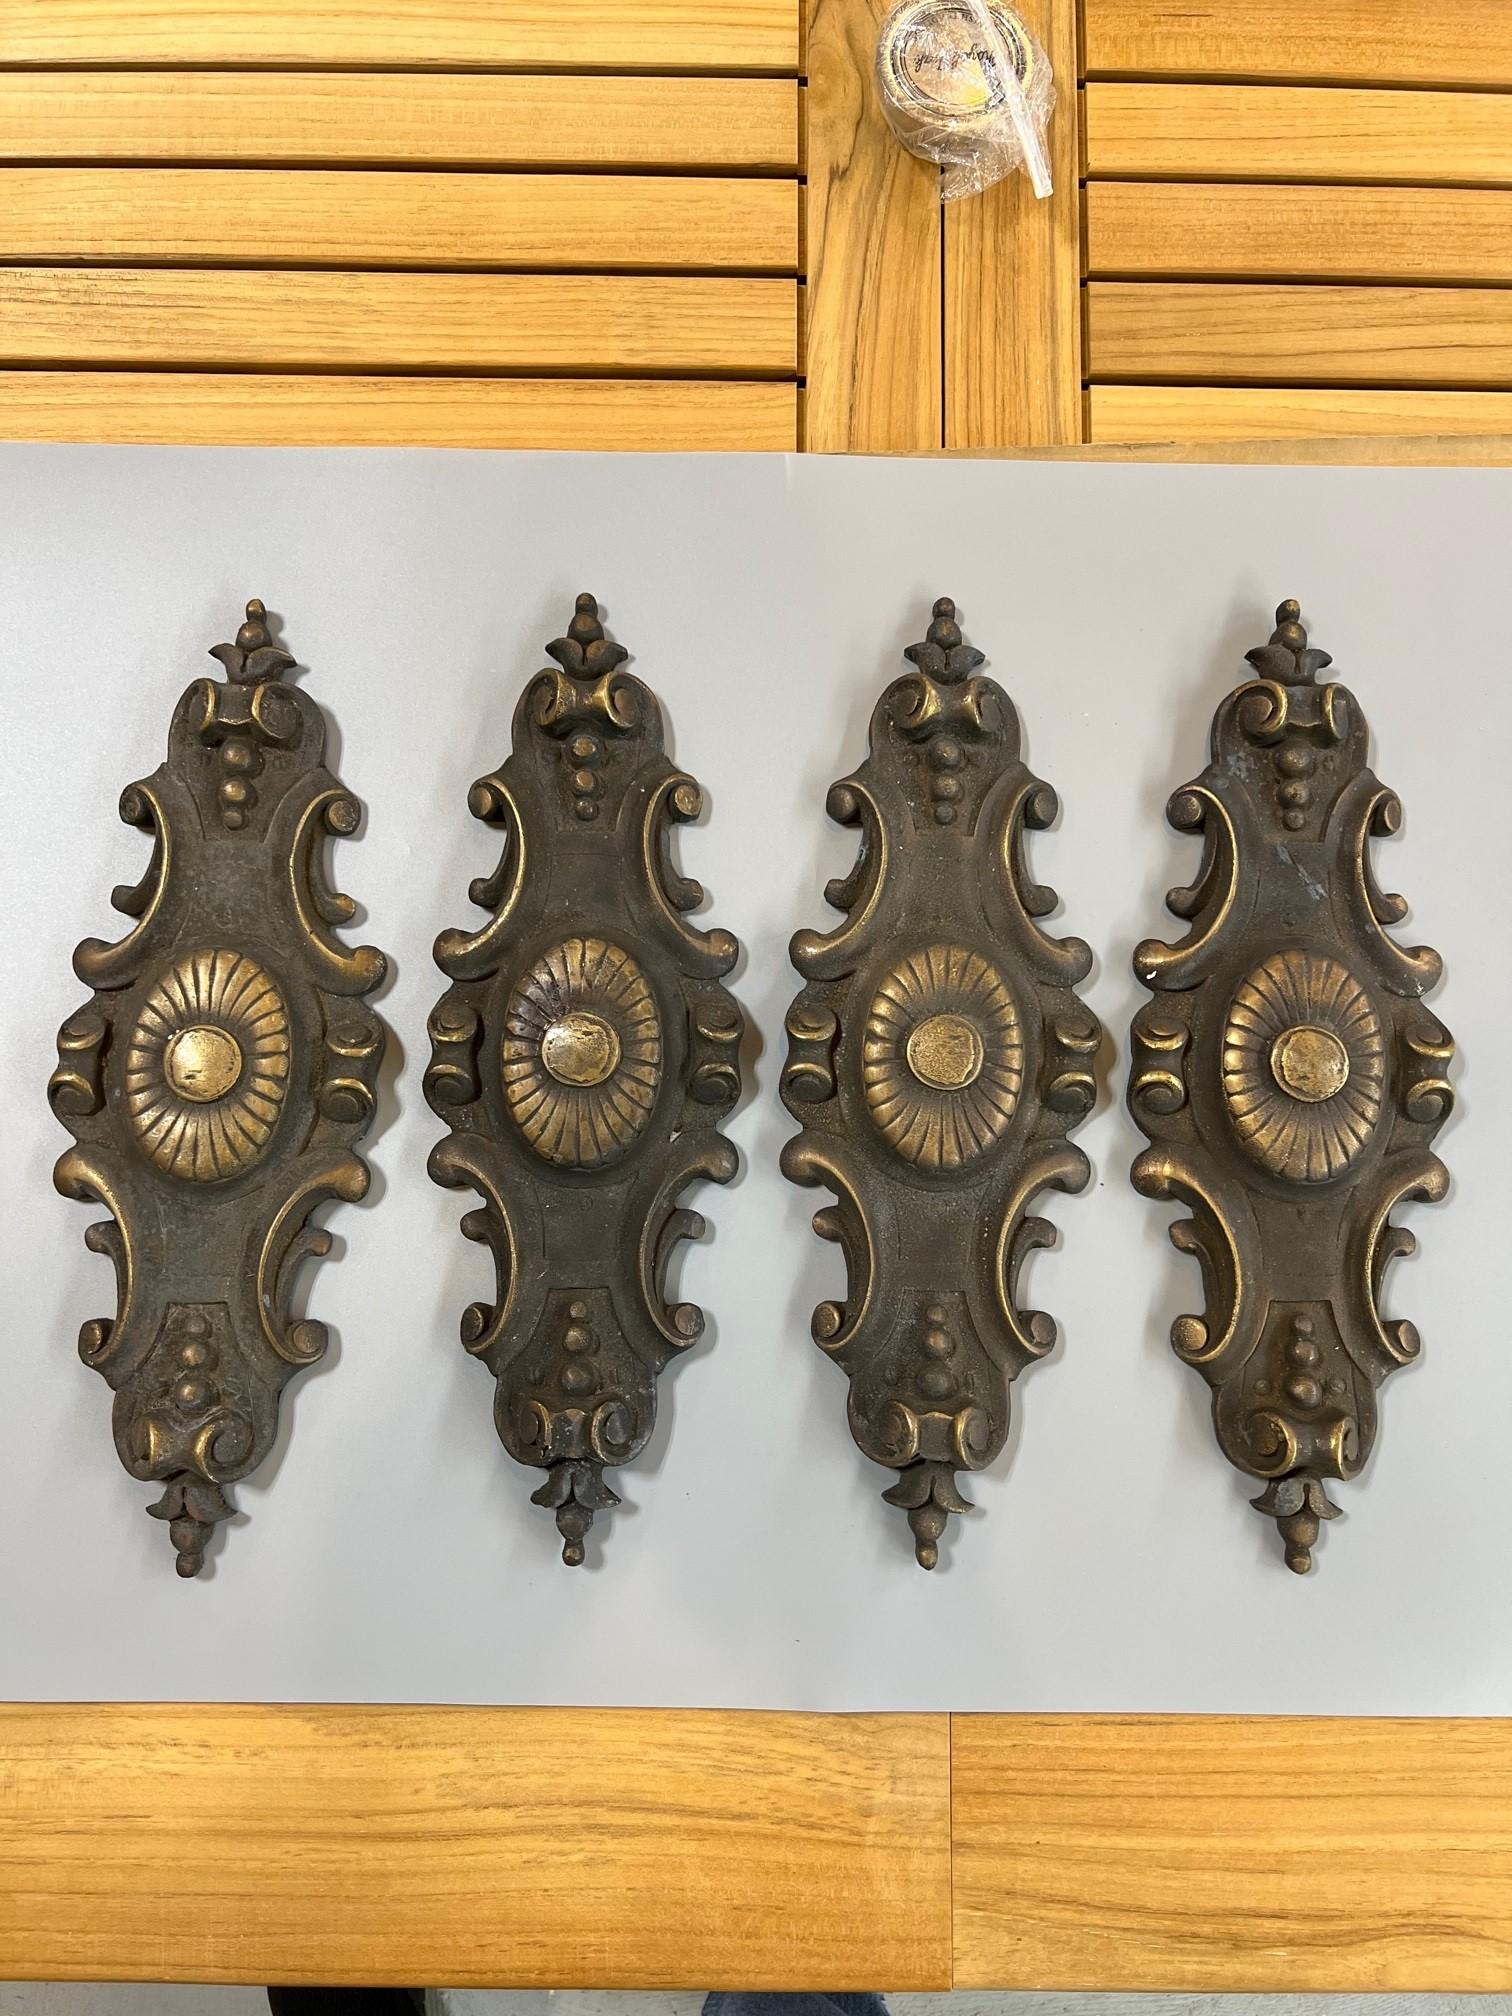 A beautiful set of 4 large cast bronze plaques in great condition. I do not think they have ever been used I purchased them from a private collector in upstate NY.  I believe they are from the 1940s and it is nice having a set of 4. I am selling